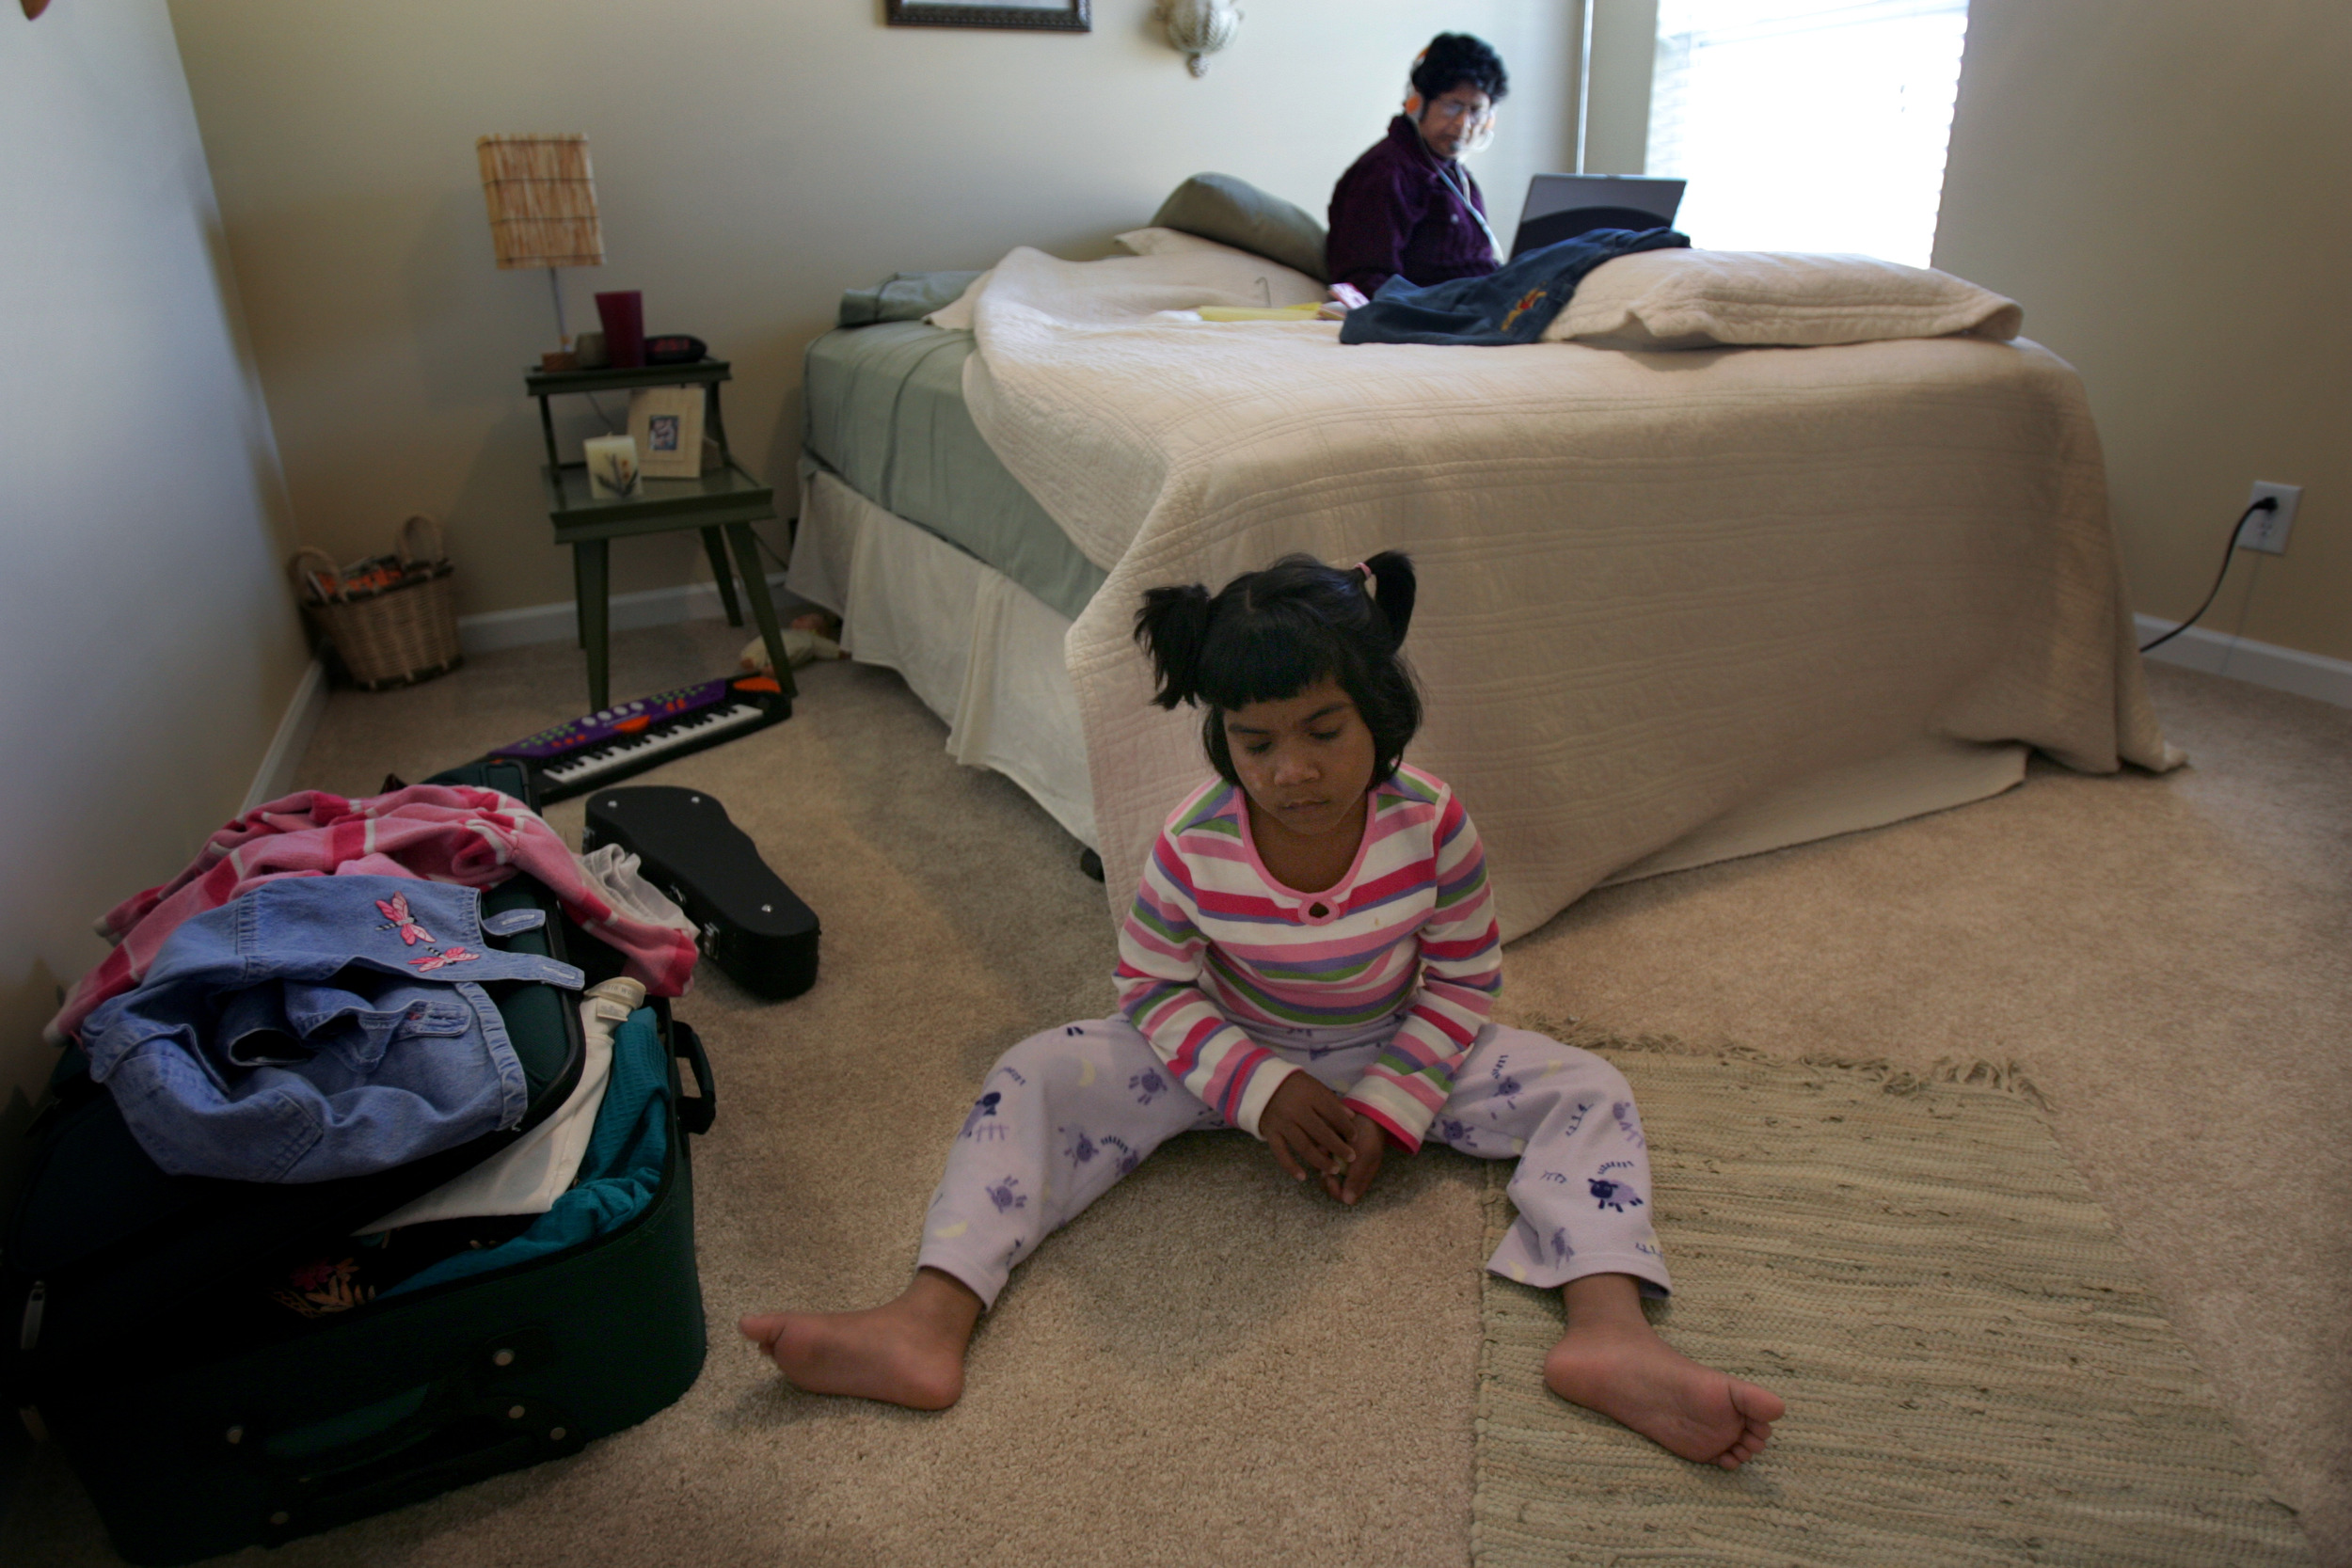  Kajal plays in her room at a new host family's house while guardian Grace Zaidi emails her husband in India November 15, 2007. The Zaidis co-founded S.O.U.P, the Society for Underprivileged People, the organization that rescued Kajal.  